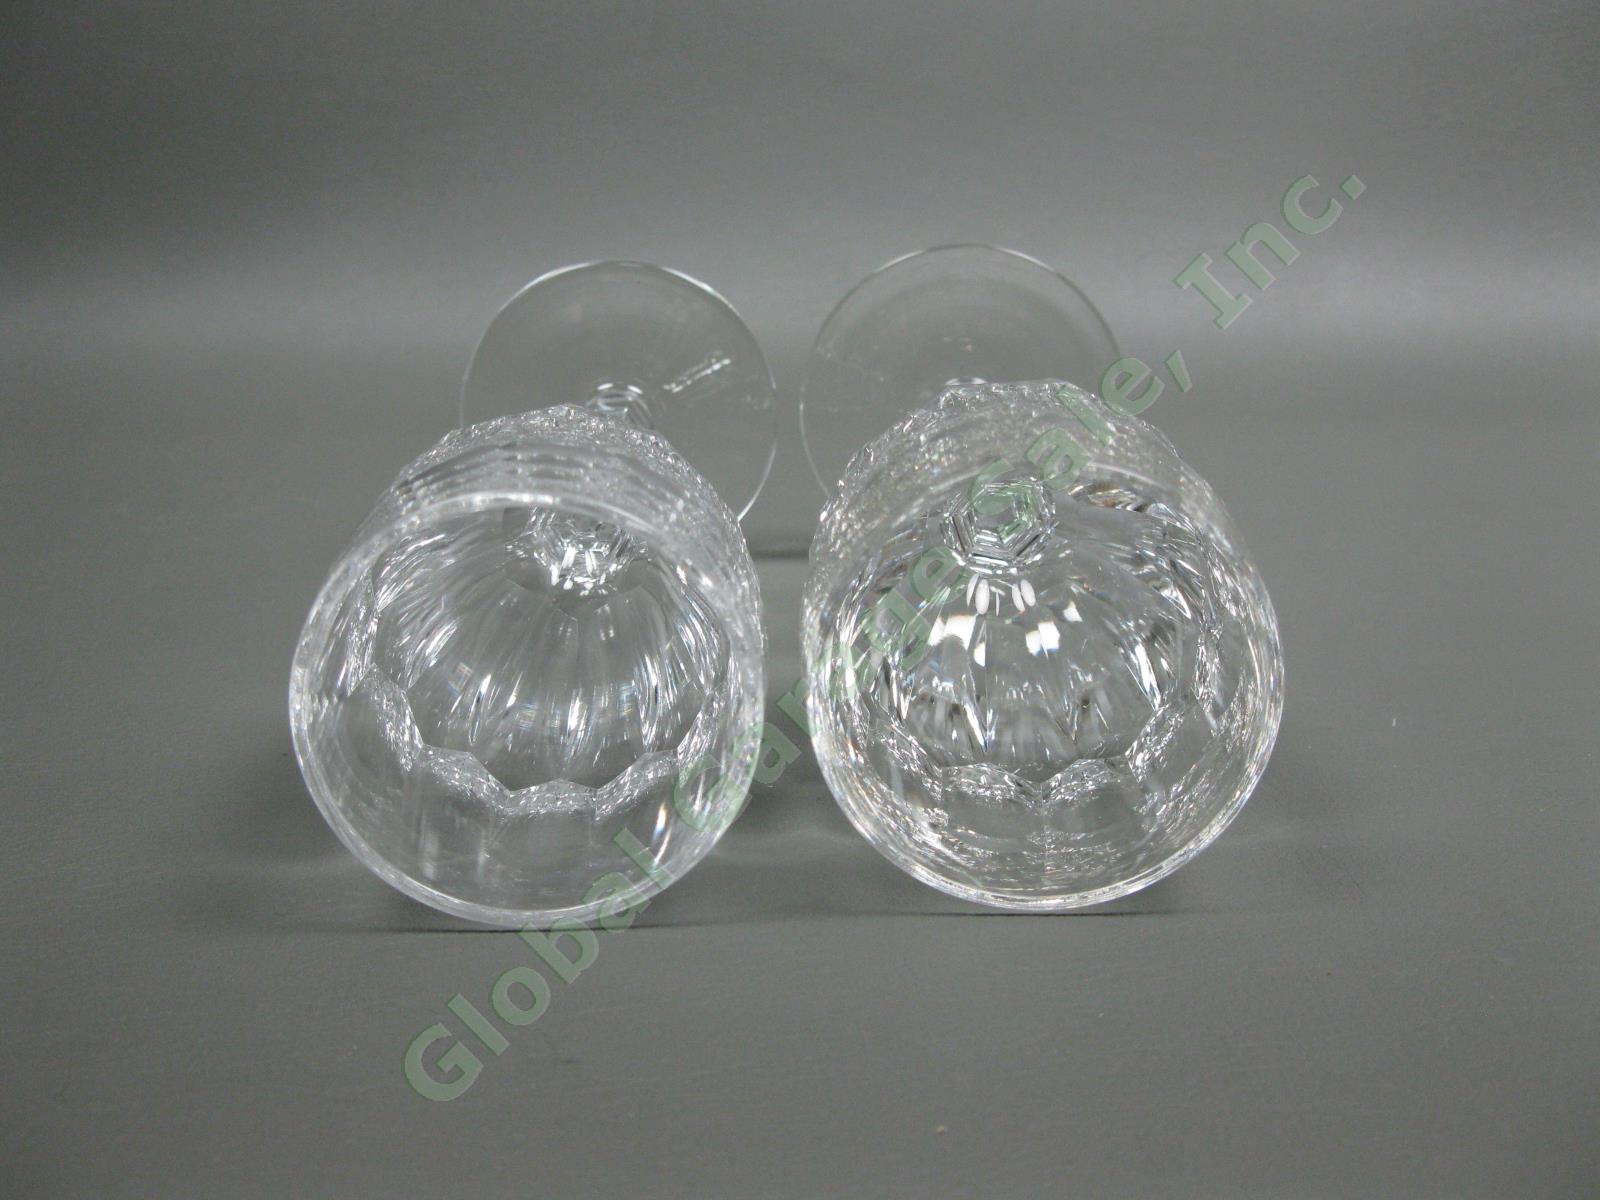 6 Waterford Crystal Curraghmore Sherry Wine Glasses Ireland Blown Cut Glass Set 8